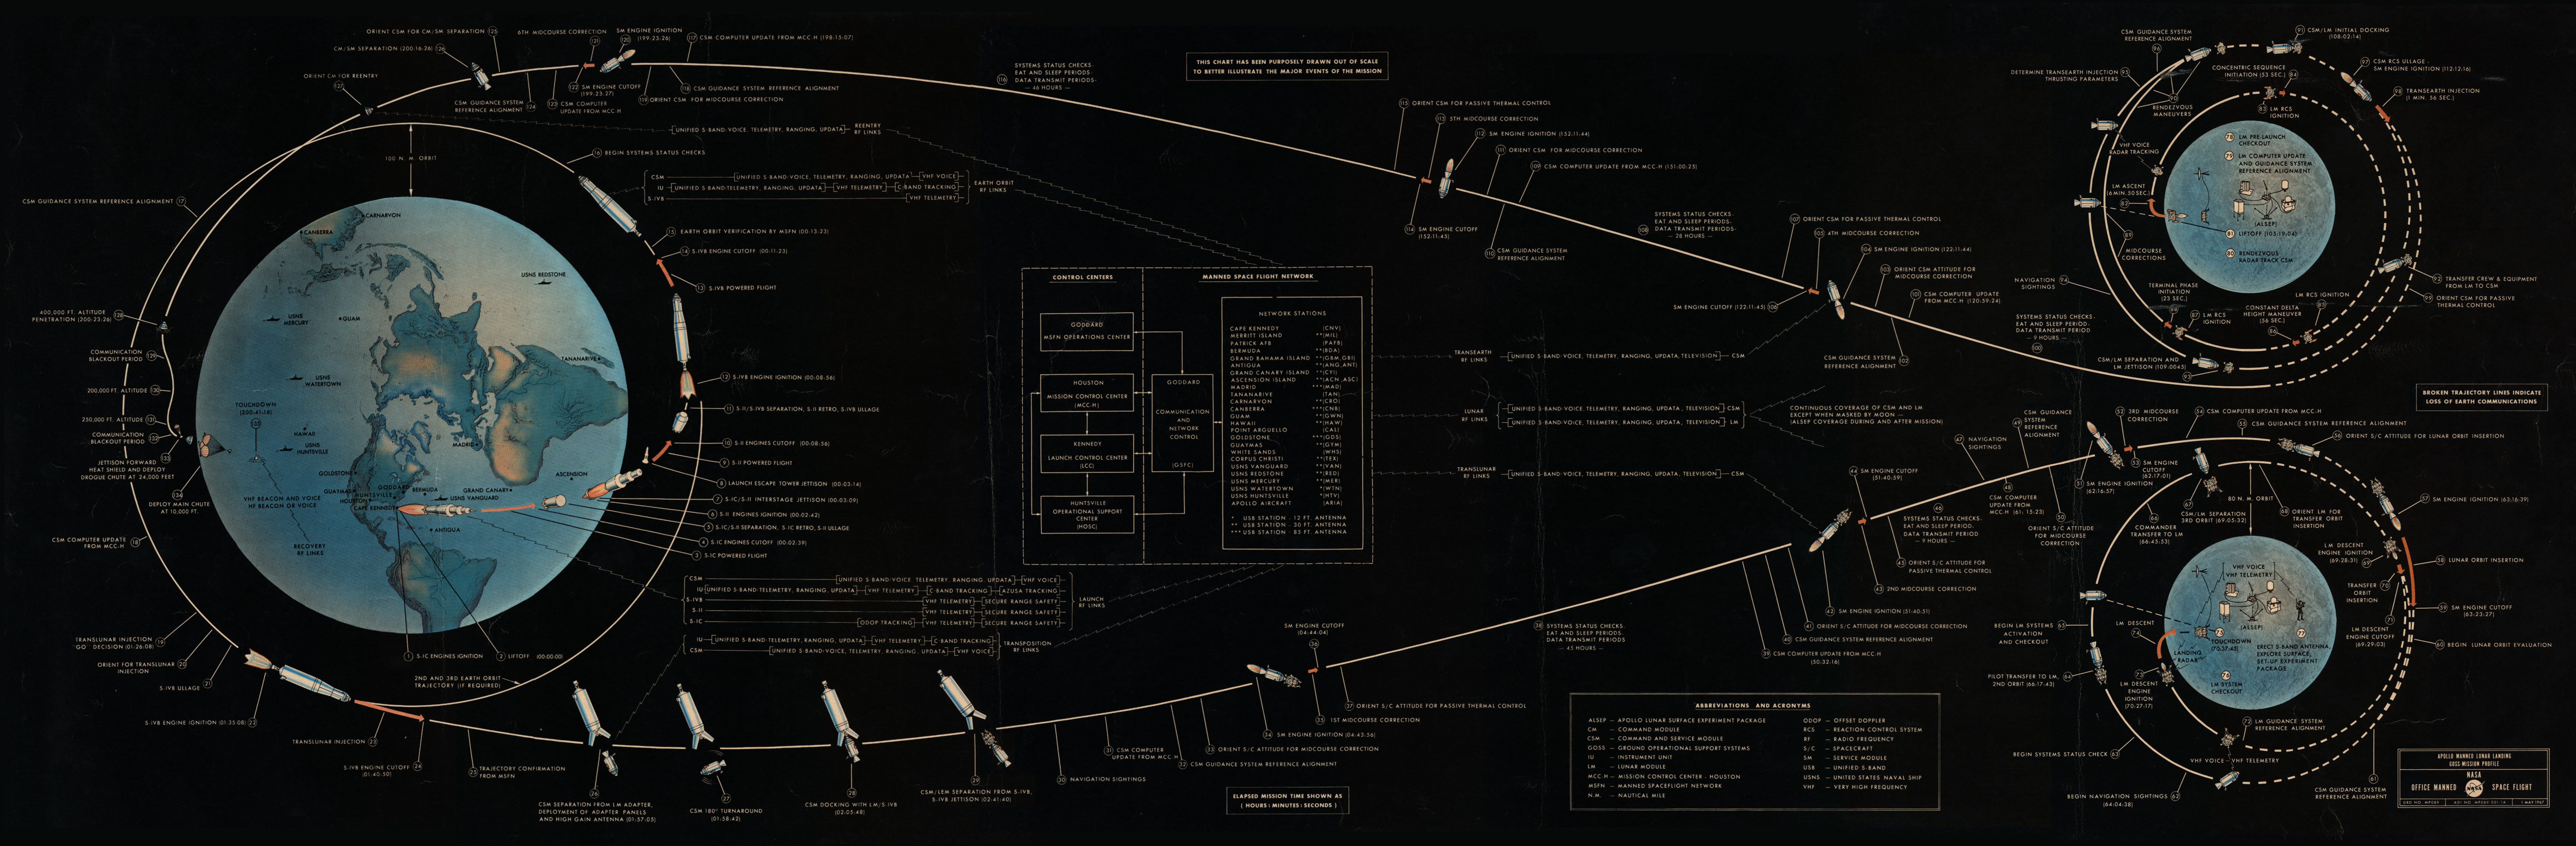 Illustration of the Apollo 11 Flight Path with labels and stages.